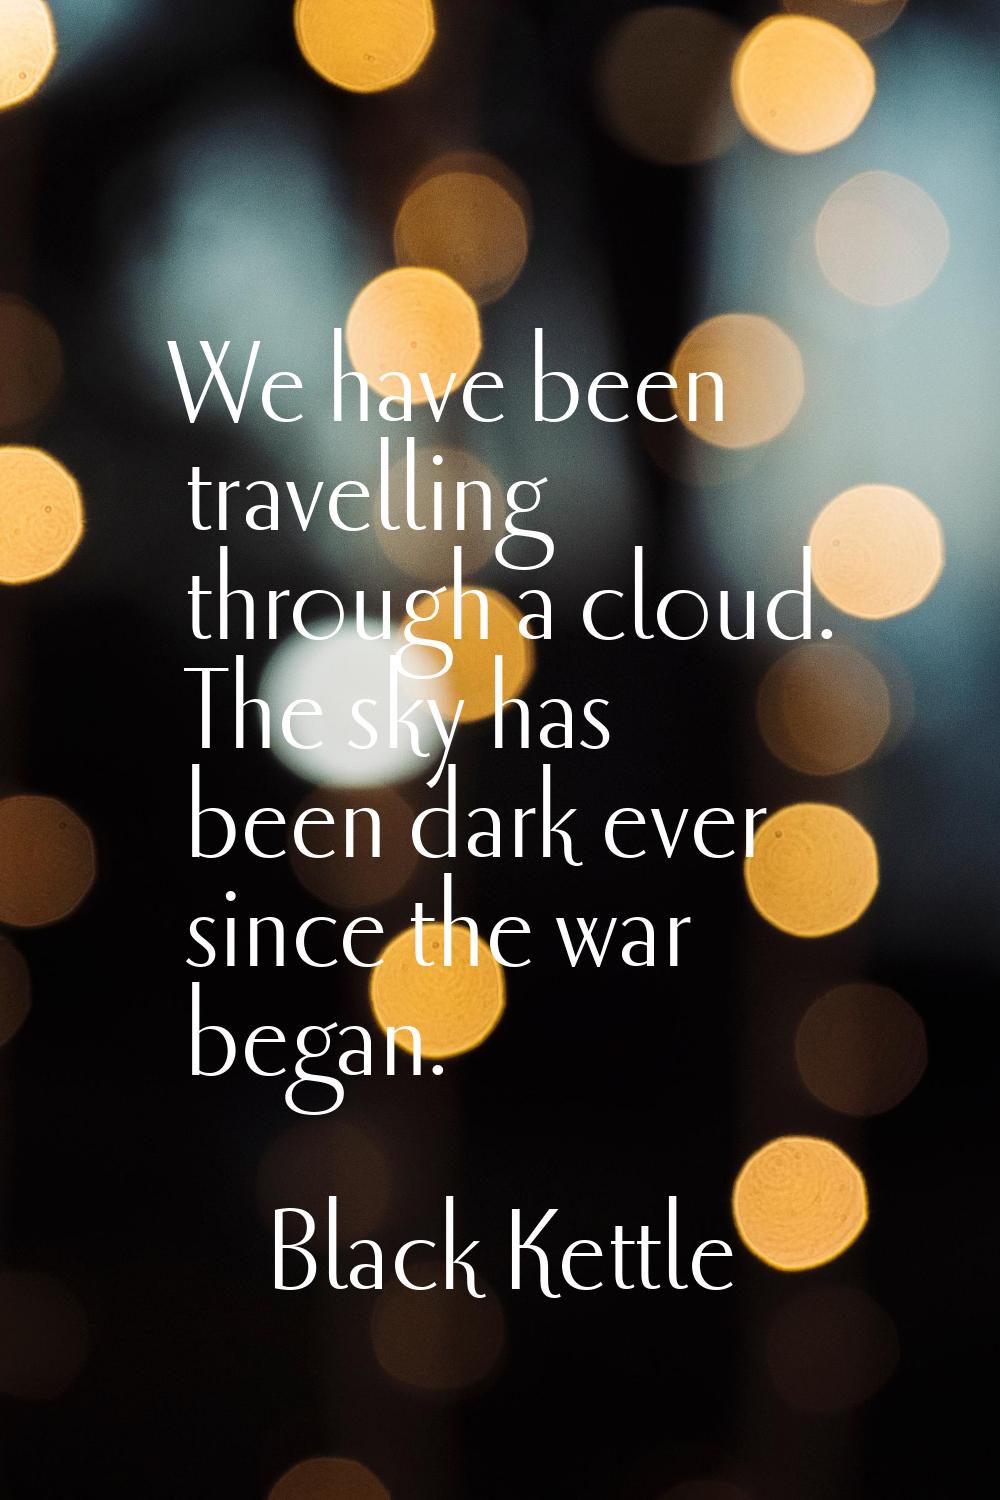 We have been travelling through a cloud. The sky has been dark ever since the war began.